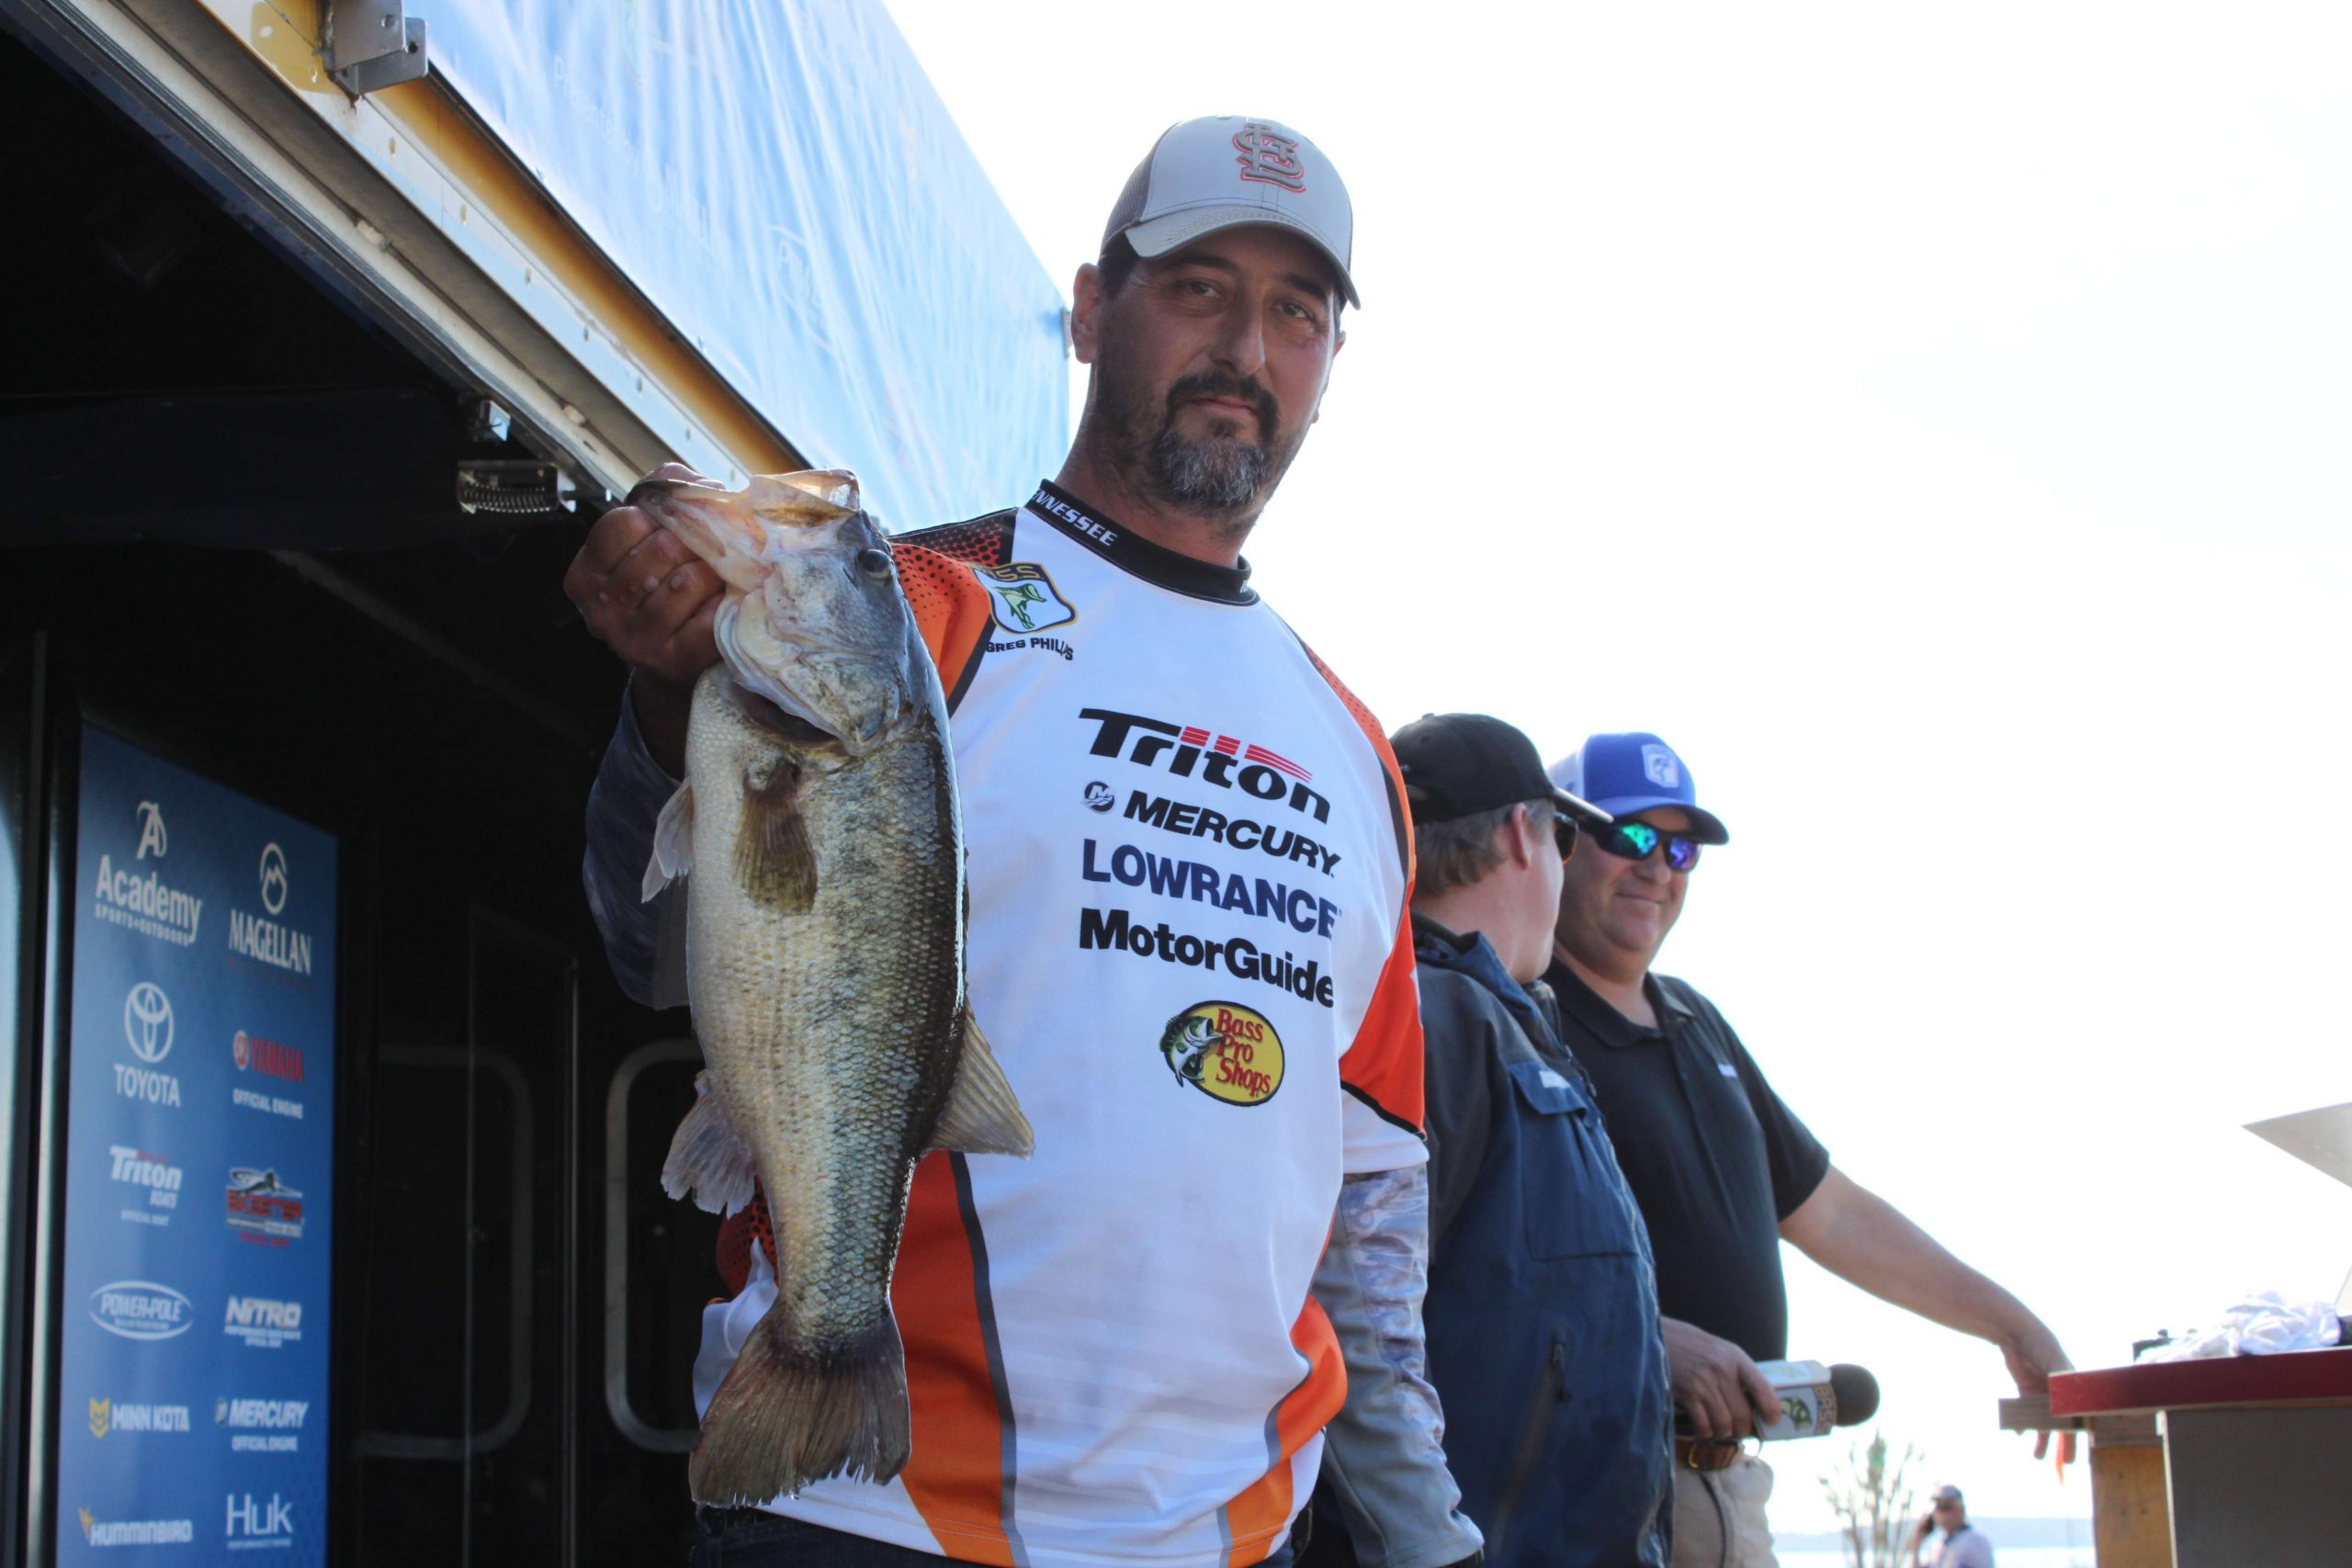  Greg Phillips of Team Tennessee is in 12th place among boaters with 31-3.
